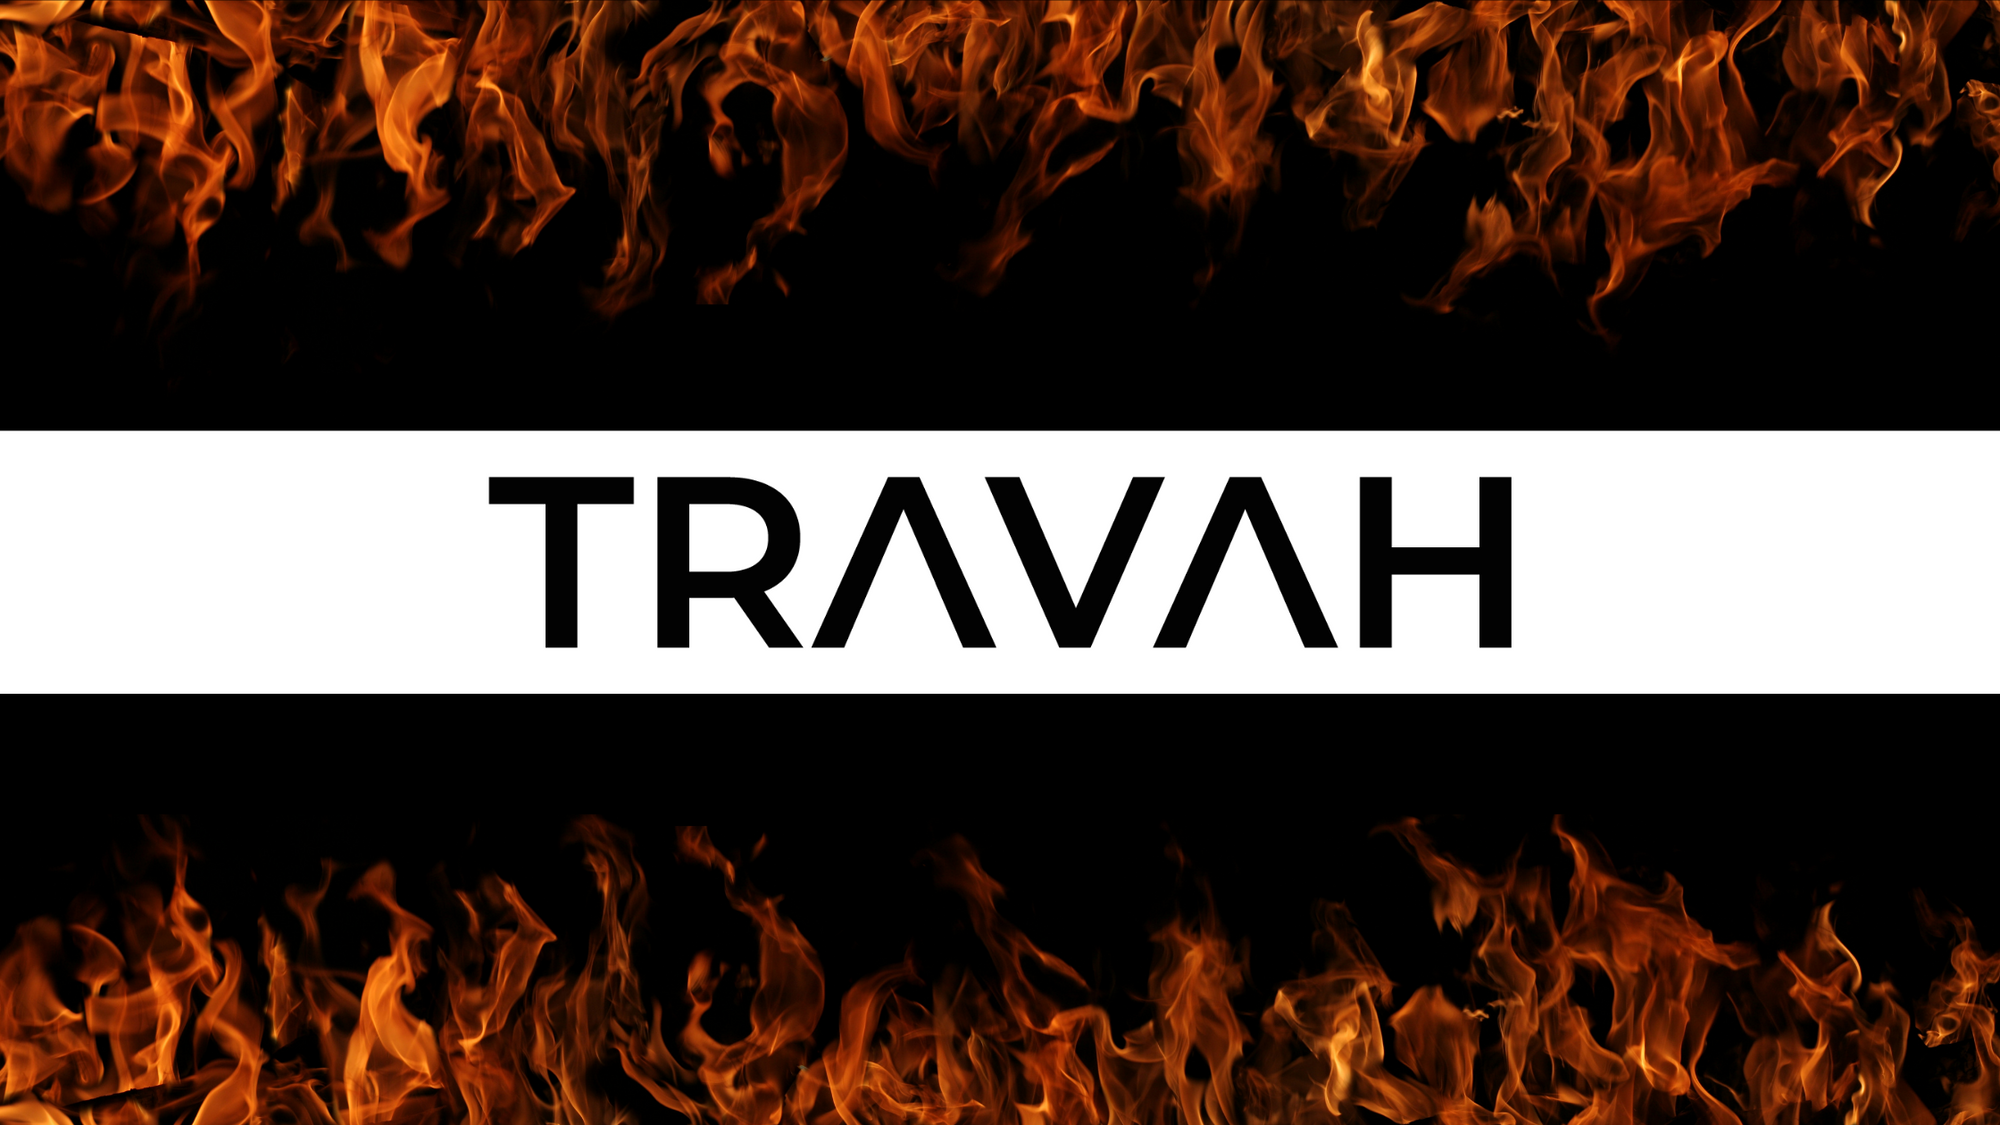 A banner with the Travah logo and some flames on the top and bottom